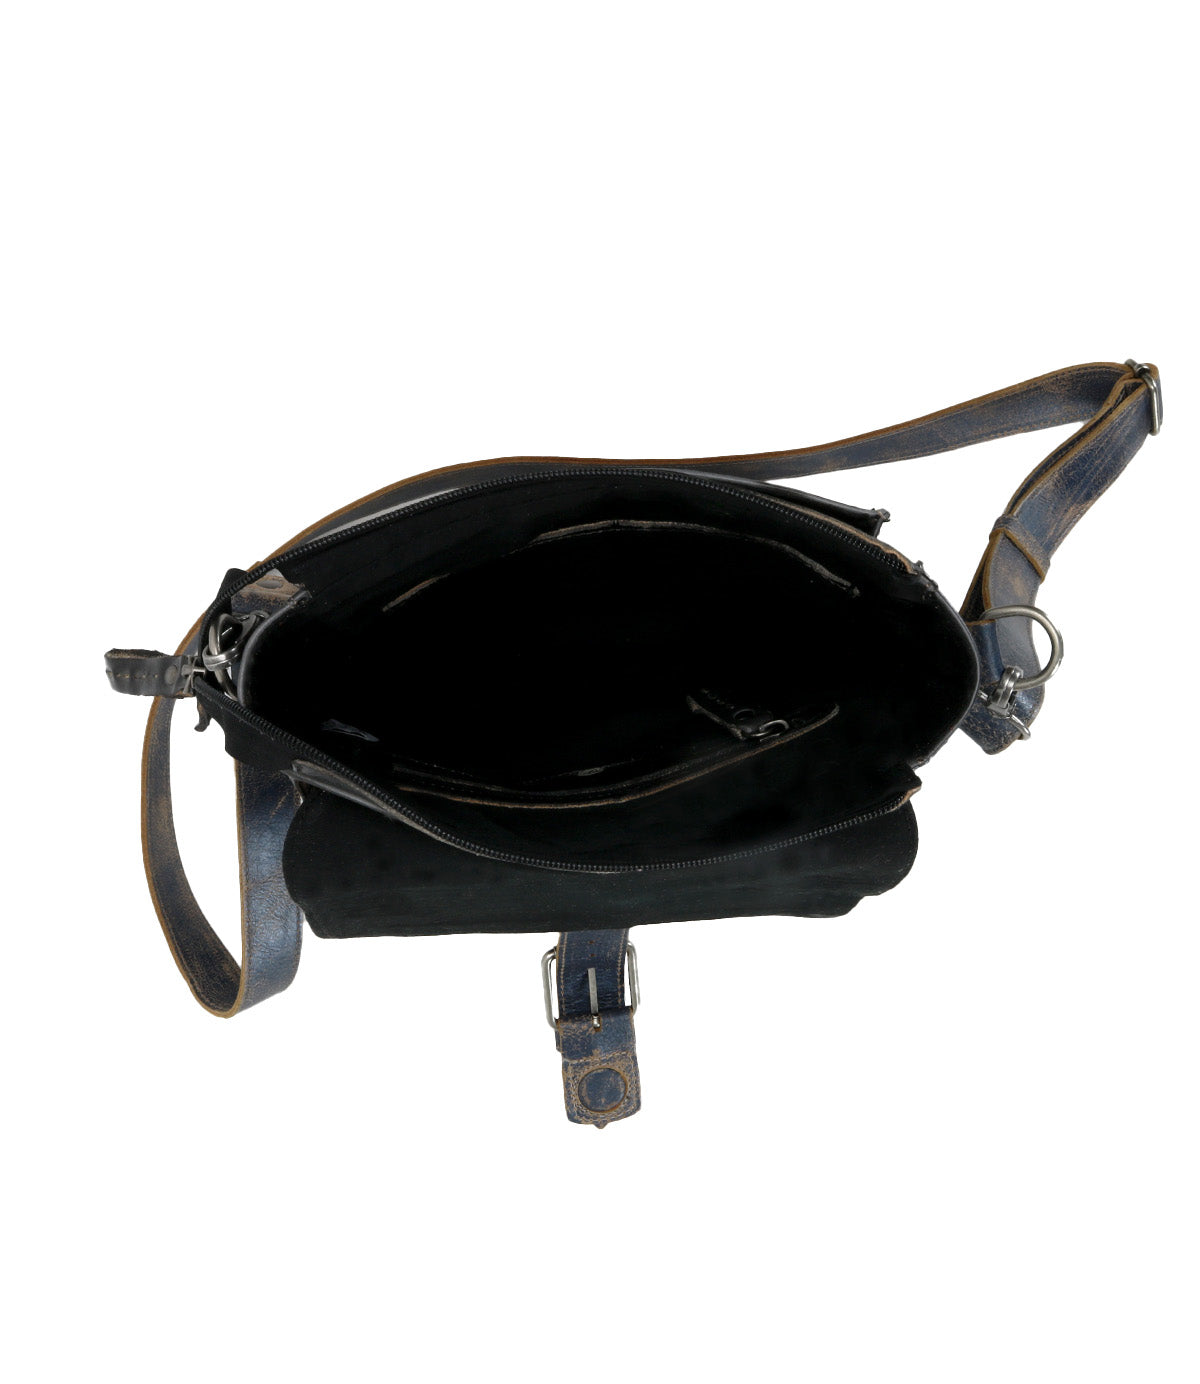 Open Bed Stu black leather crossbody handbag isolated on white background, showing empty interior and adjustable strap.